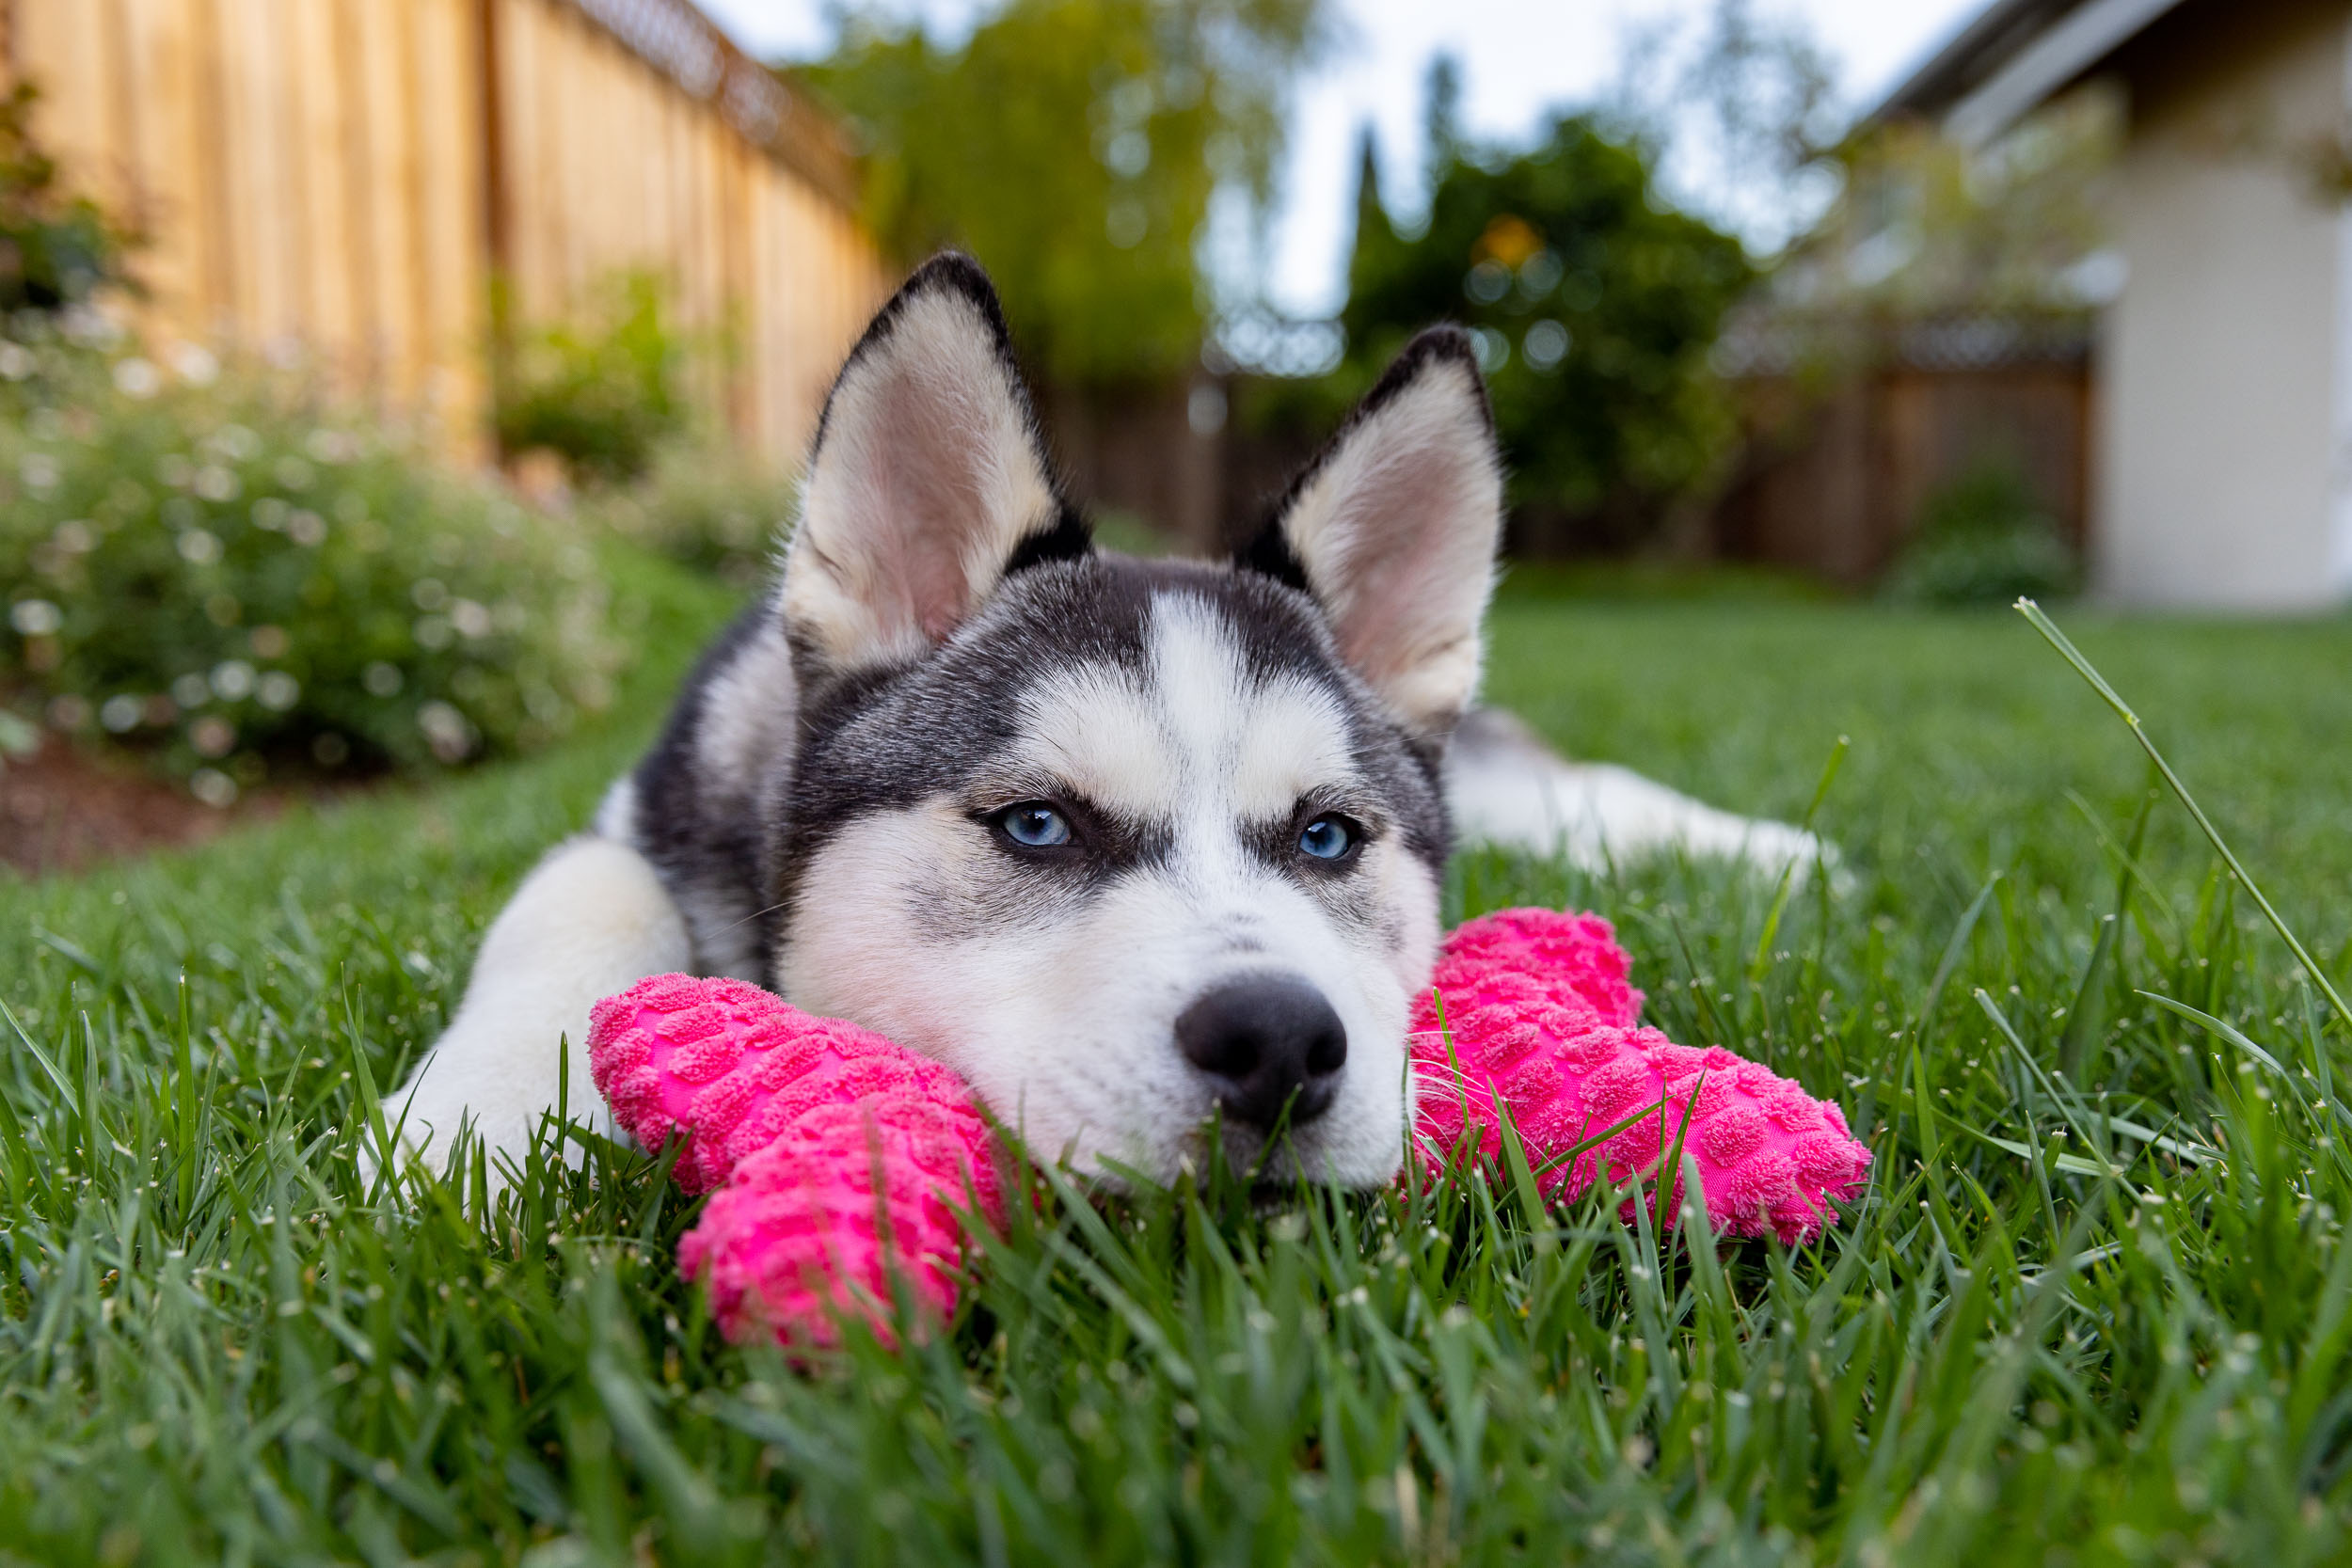 husky-puppy-resting-chin-on-pink-toy-in-grass-0246